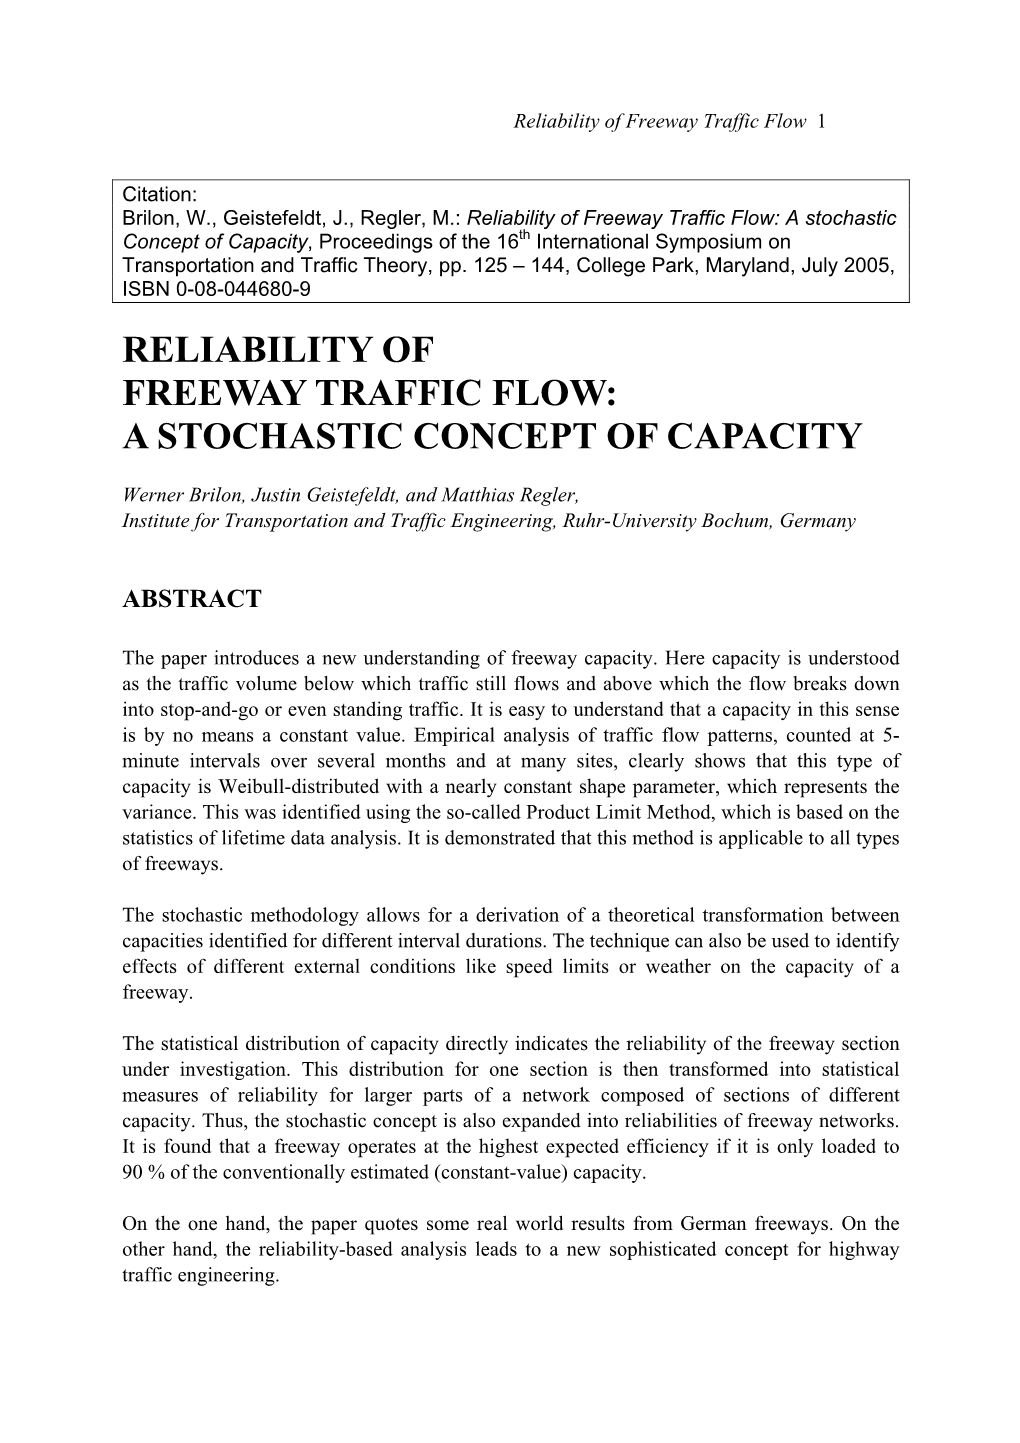 A Stochastic Concept of Capacity, Proceedings of the 16Th International Symposium on Transportation and Traffic Theory, Pp